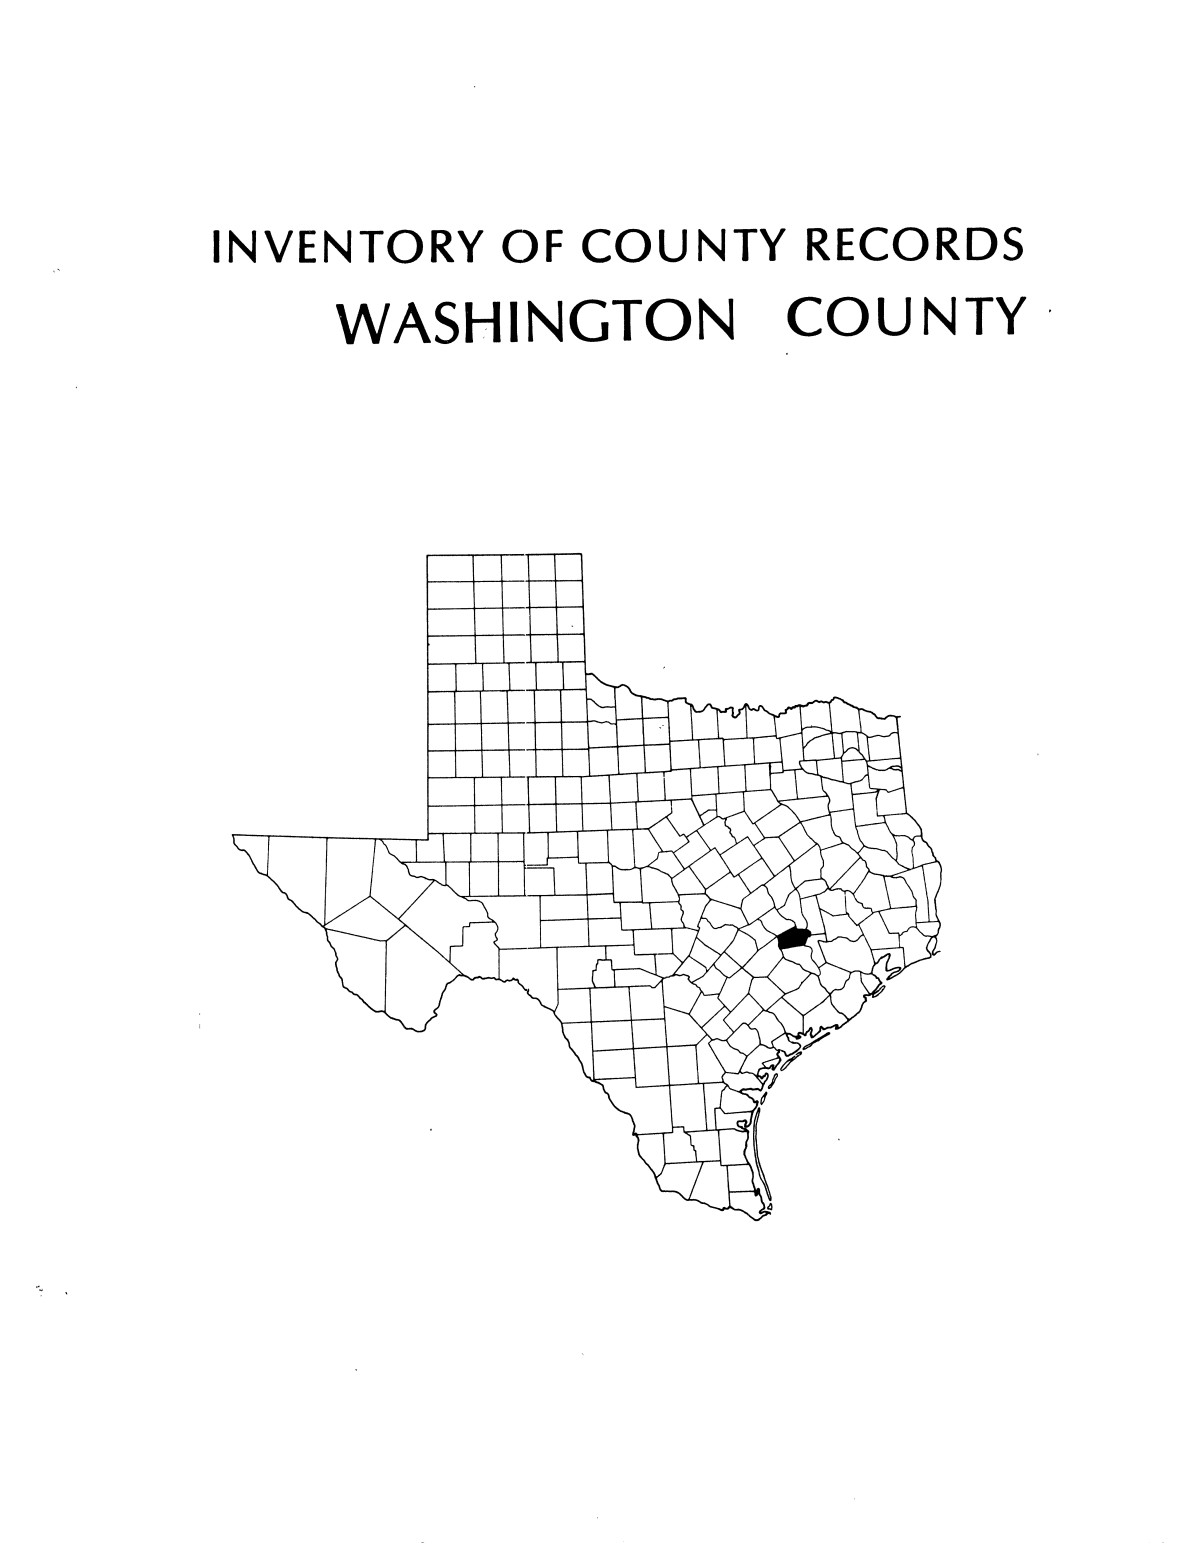 Inventory of county records, Washington County courthouse, Brenham, Texas
                                                
                                                    Front Cover
                                                